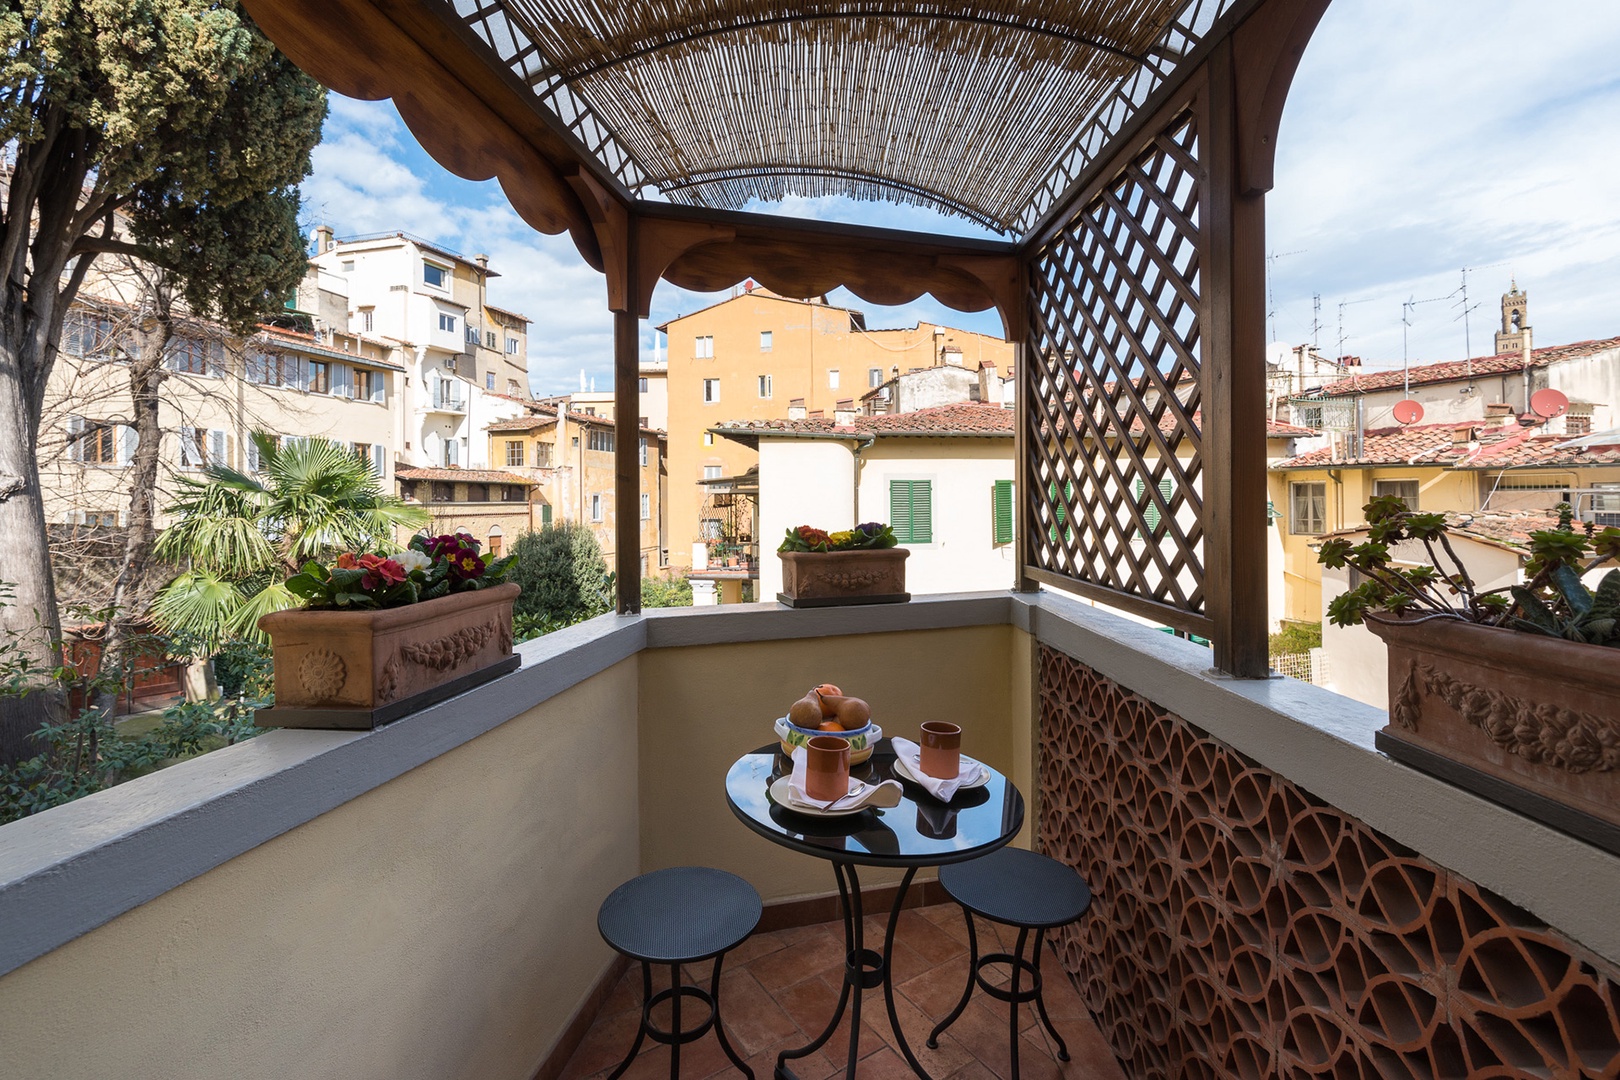 Buon giorno! Upstairs terrace is an ideal spot to greet the day.